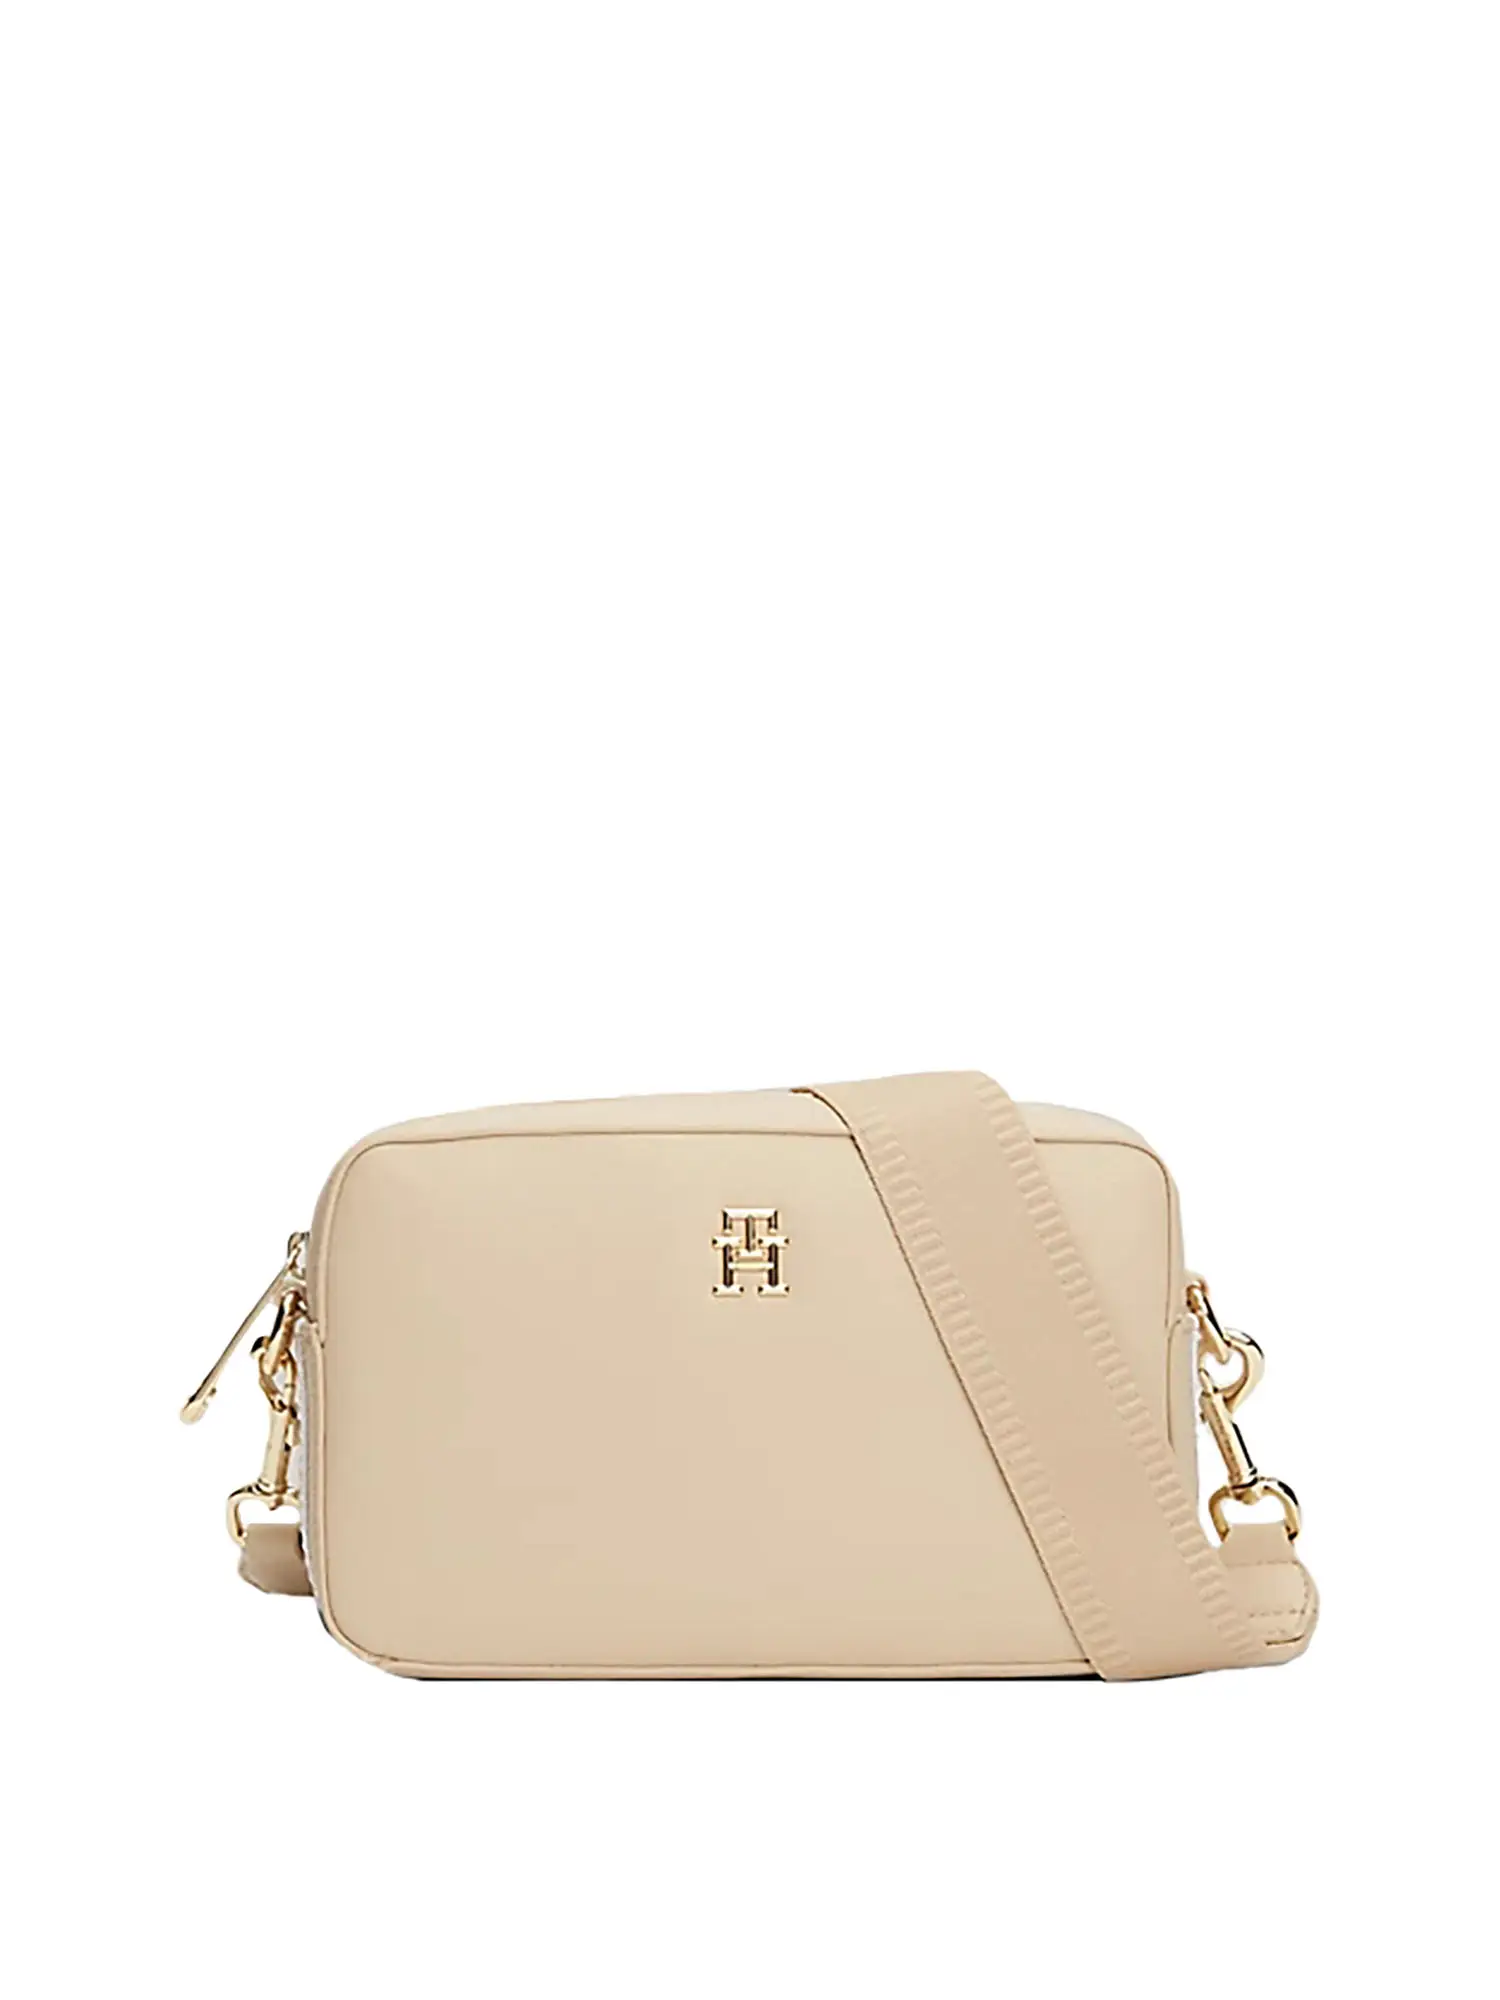 TRACOLLA DONNA - TOMMY HILFIGER - AW0AW15724 - BIANCO, UNICA